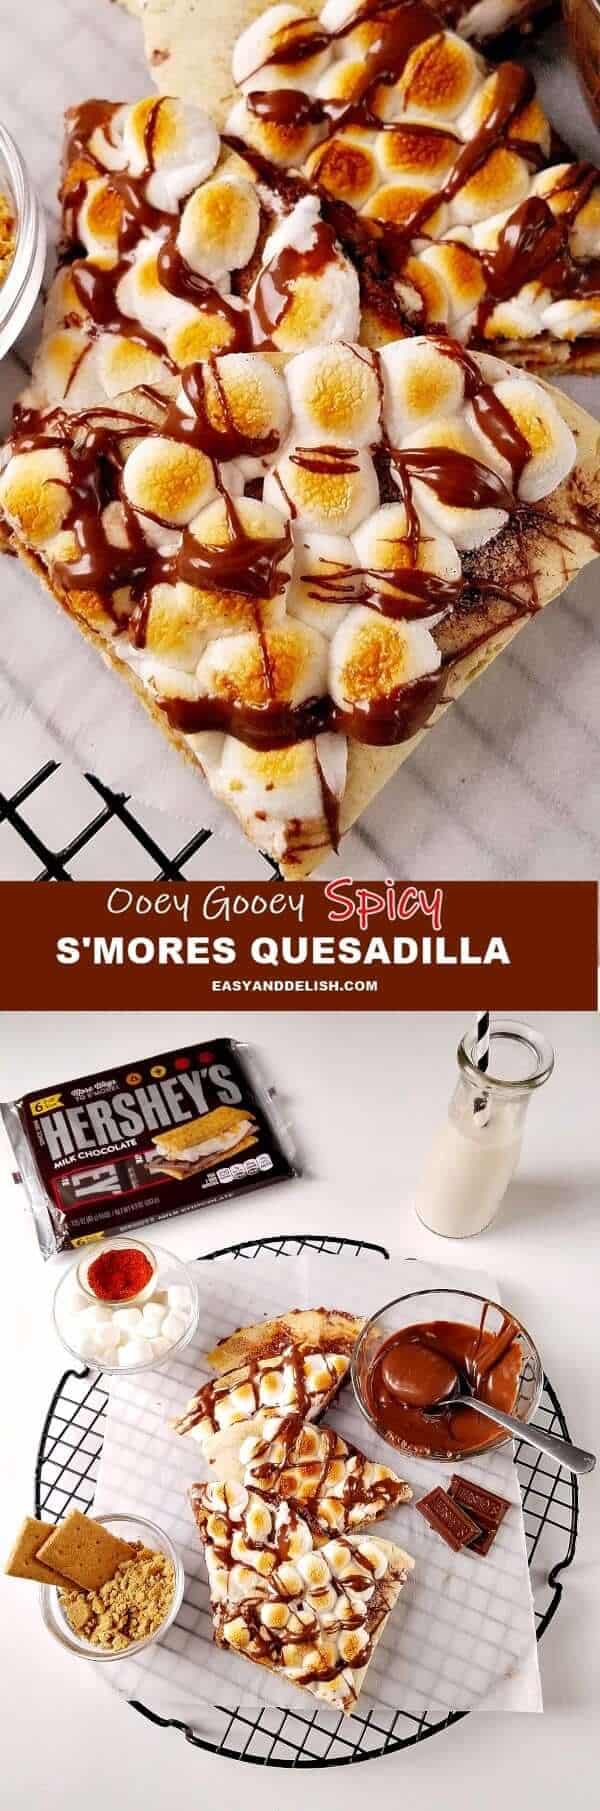 Image collage showing spicy smores quesadillas and its ingredients. 